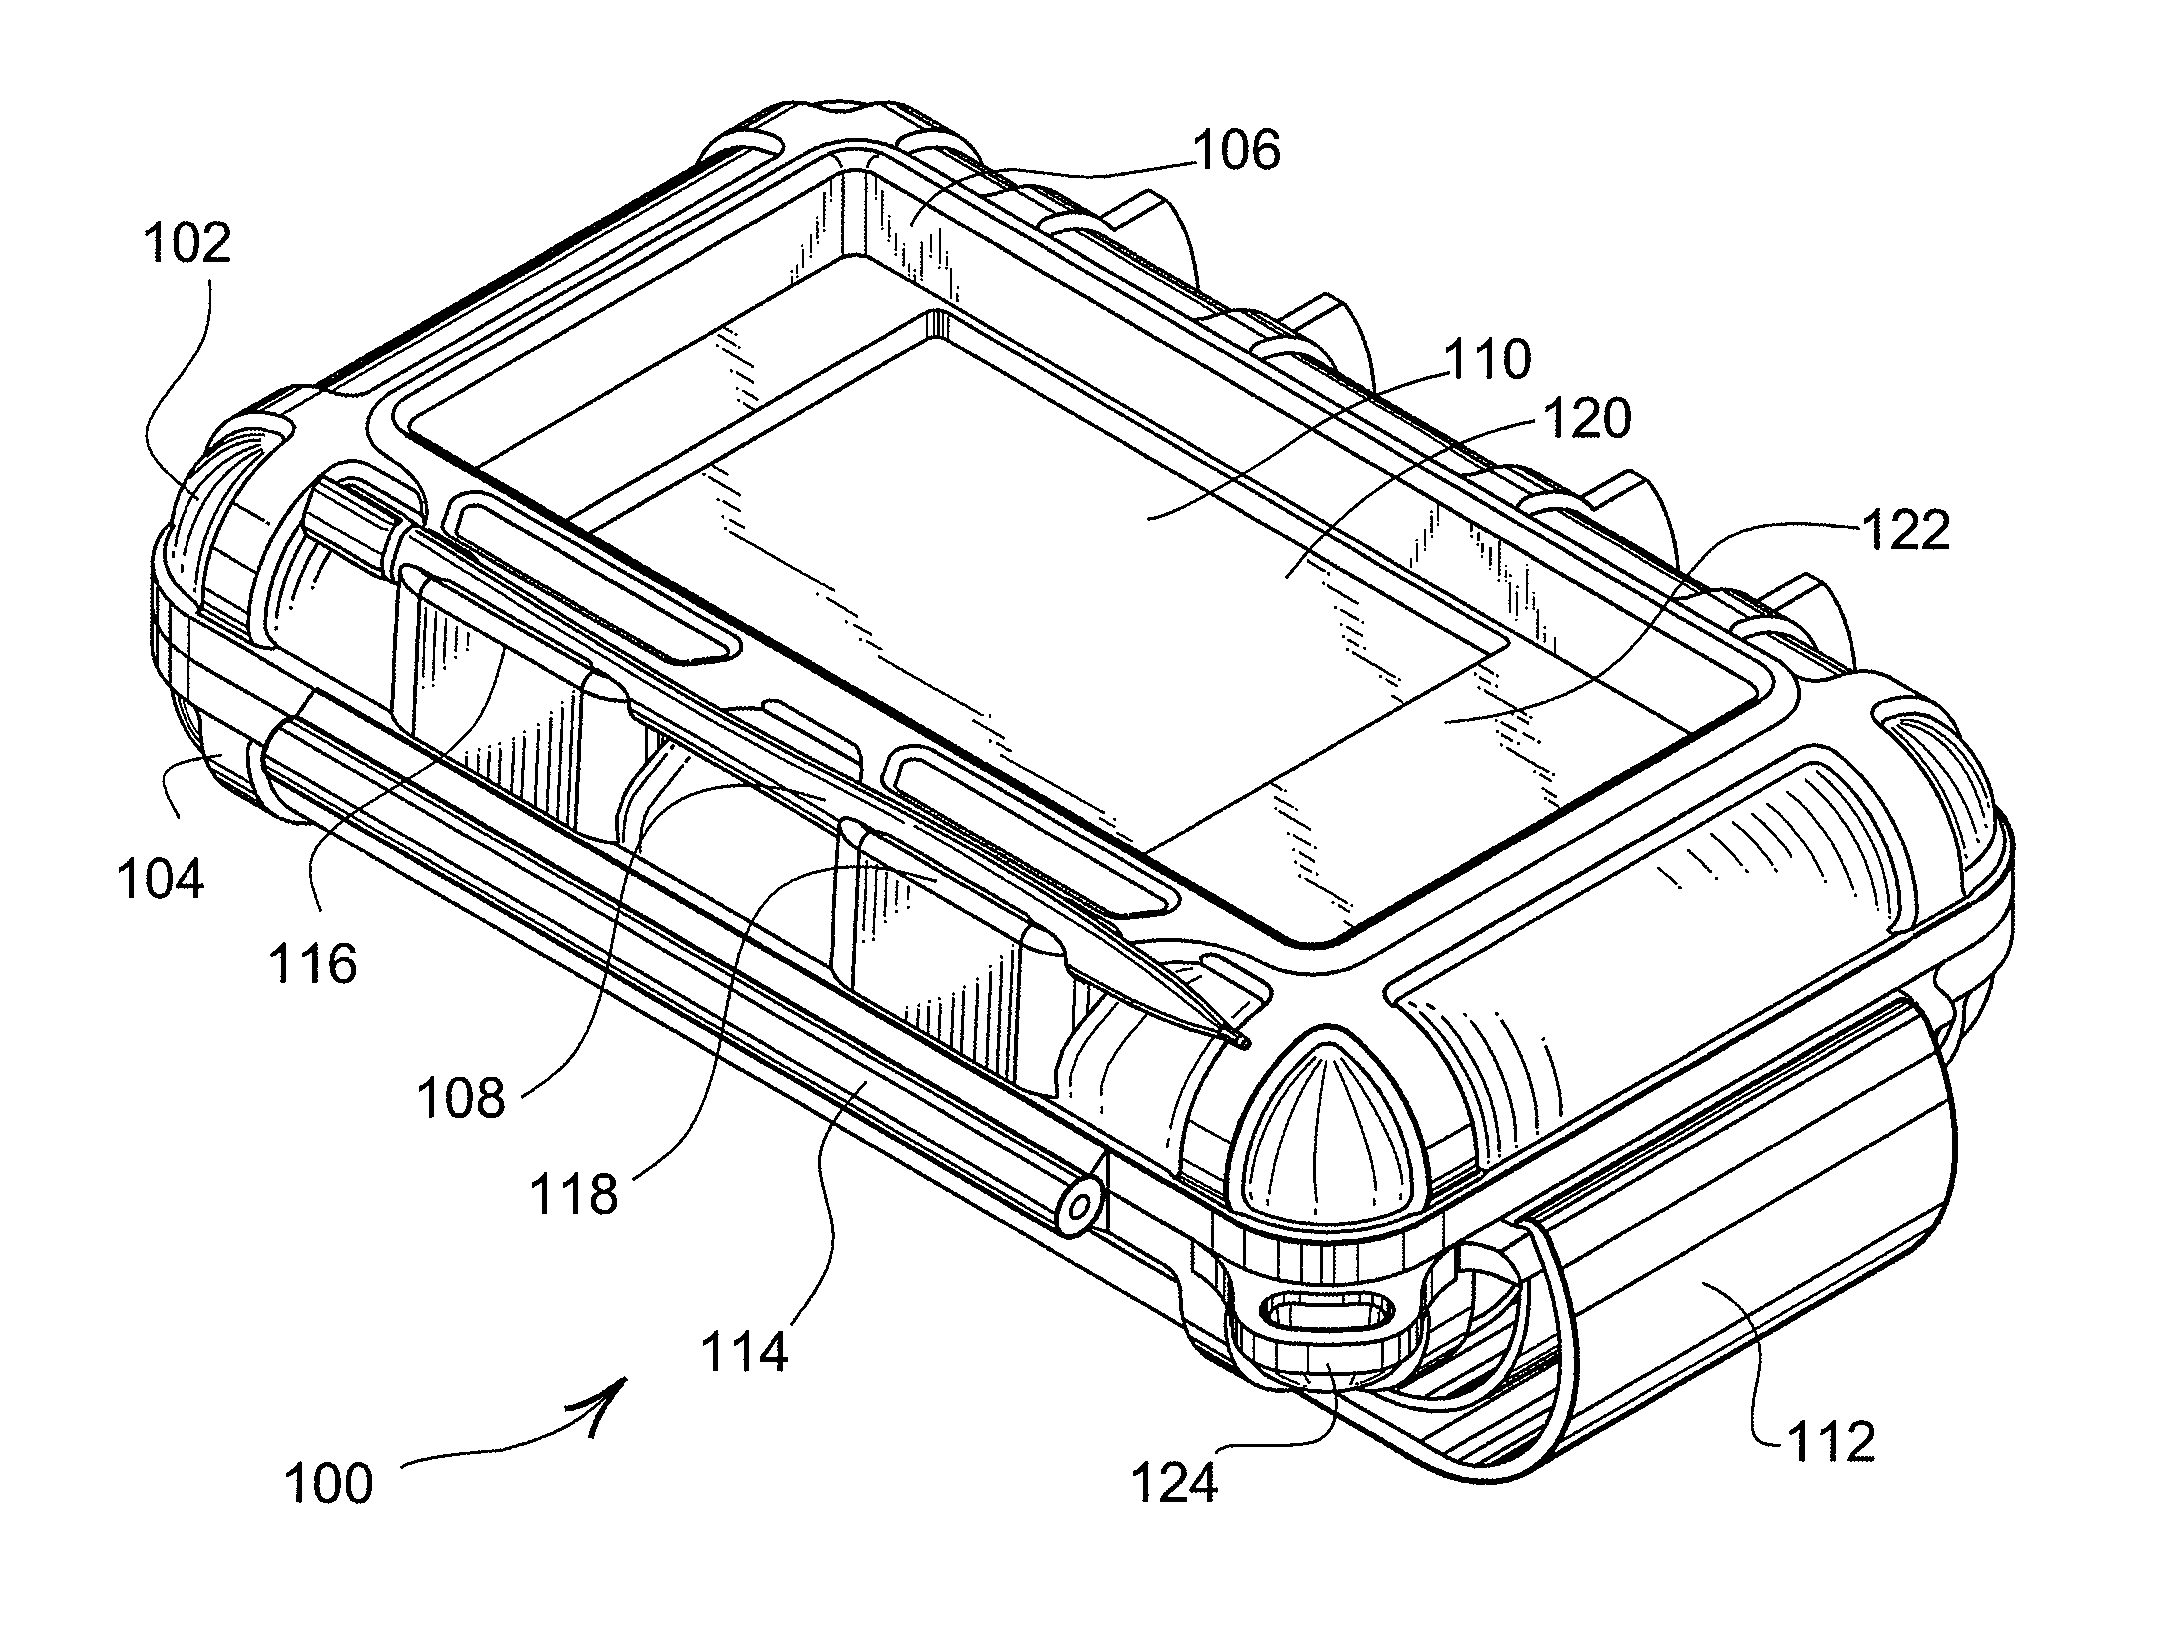 Protective enclosure for electronic device